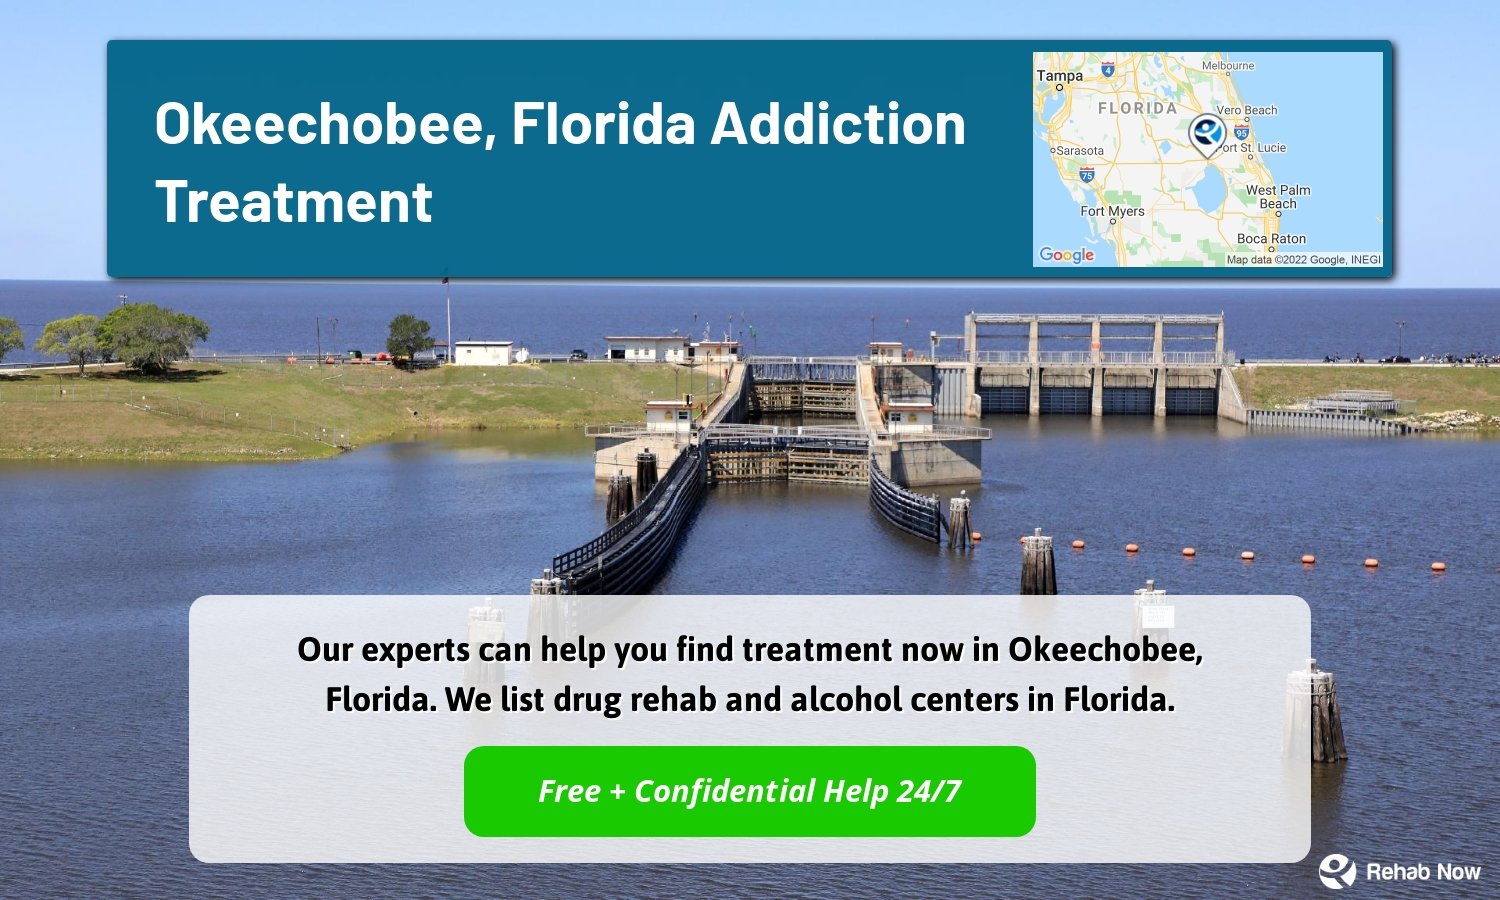 Our experts can help you find treatment now in Okeechobee, Florida. We list drug rehab and alcohol centers in Florida.